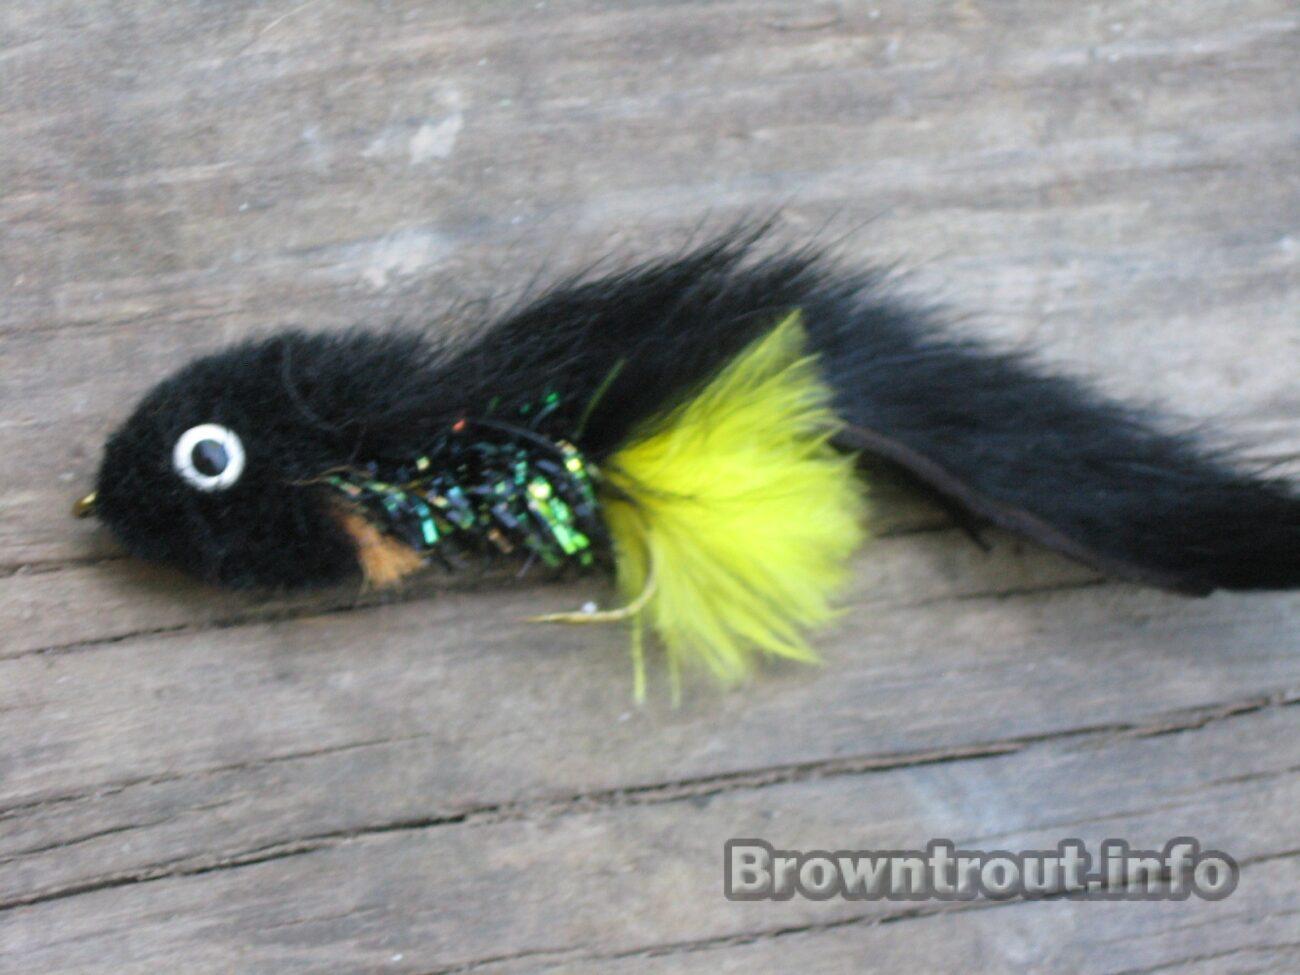 Butt Monkey Streamer for night fishing Trout, The best Mouse fly patterns for fly fishing trout at night, streamer fly patterns, streamer flies for trout, mice tails for trout, trout streamer patterns